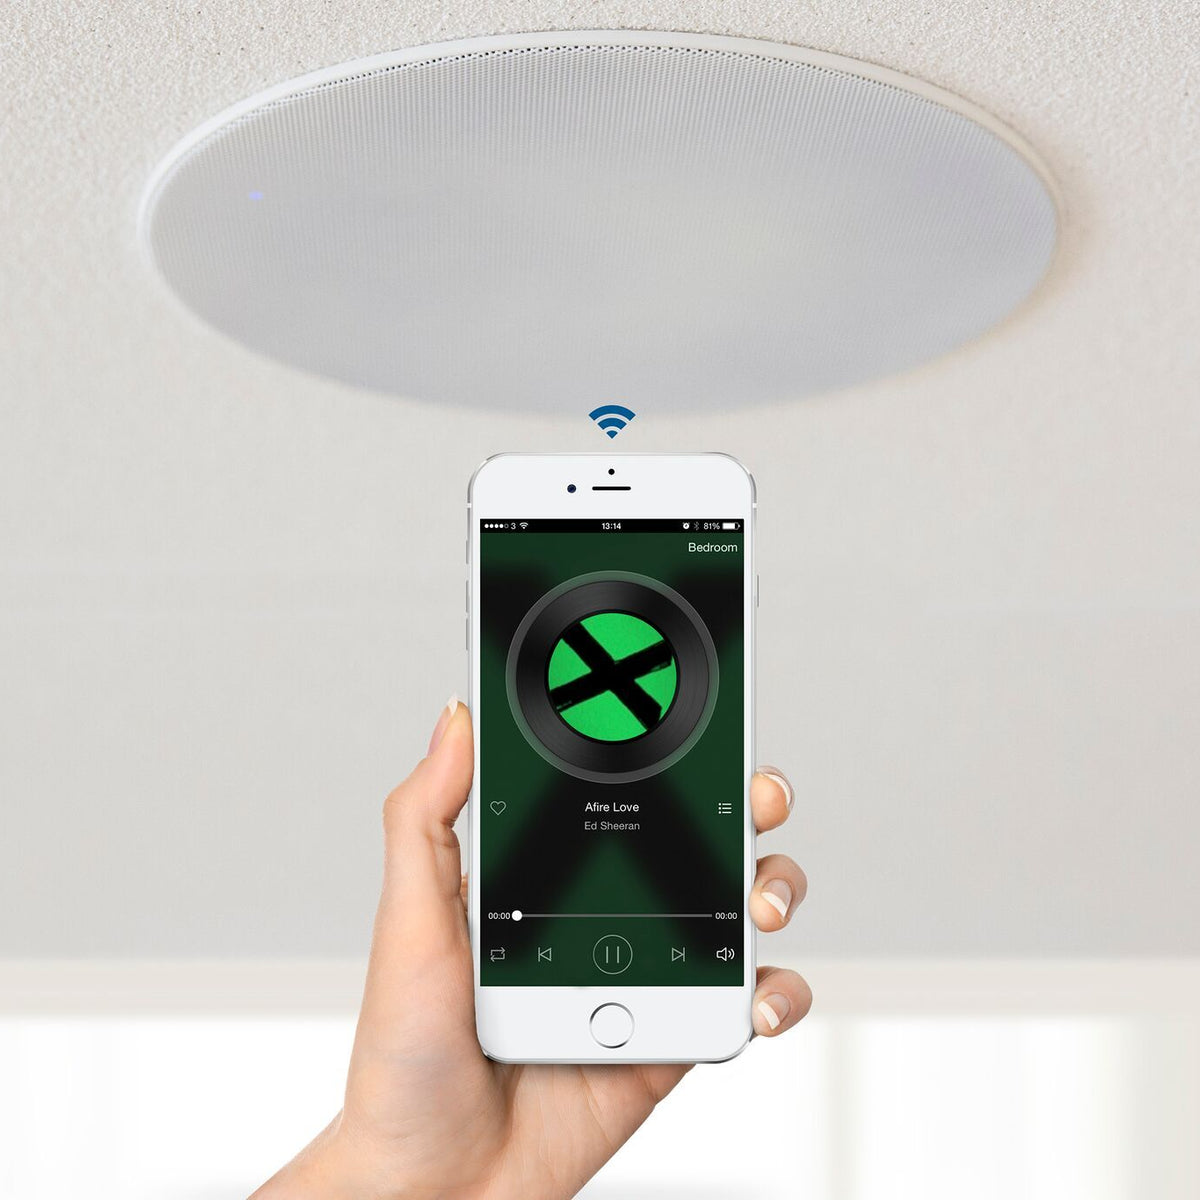 Top 5 Kitchen Ceiling Speaker Systems In 2019 Bluetooth Edition 392014 ?crop=center&height=1200&v=1624983727&width=1200